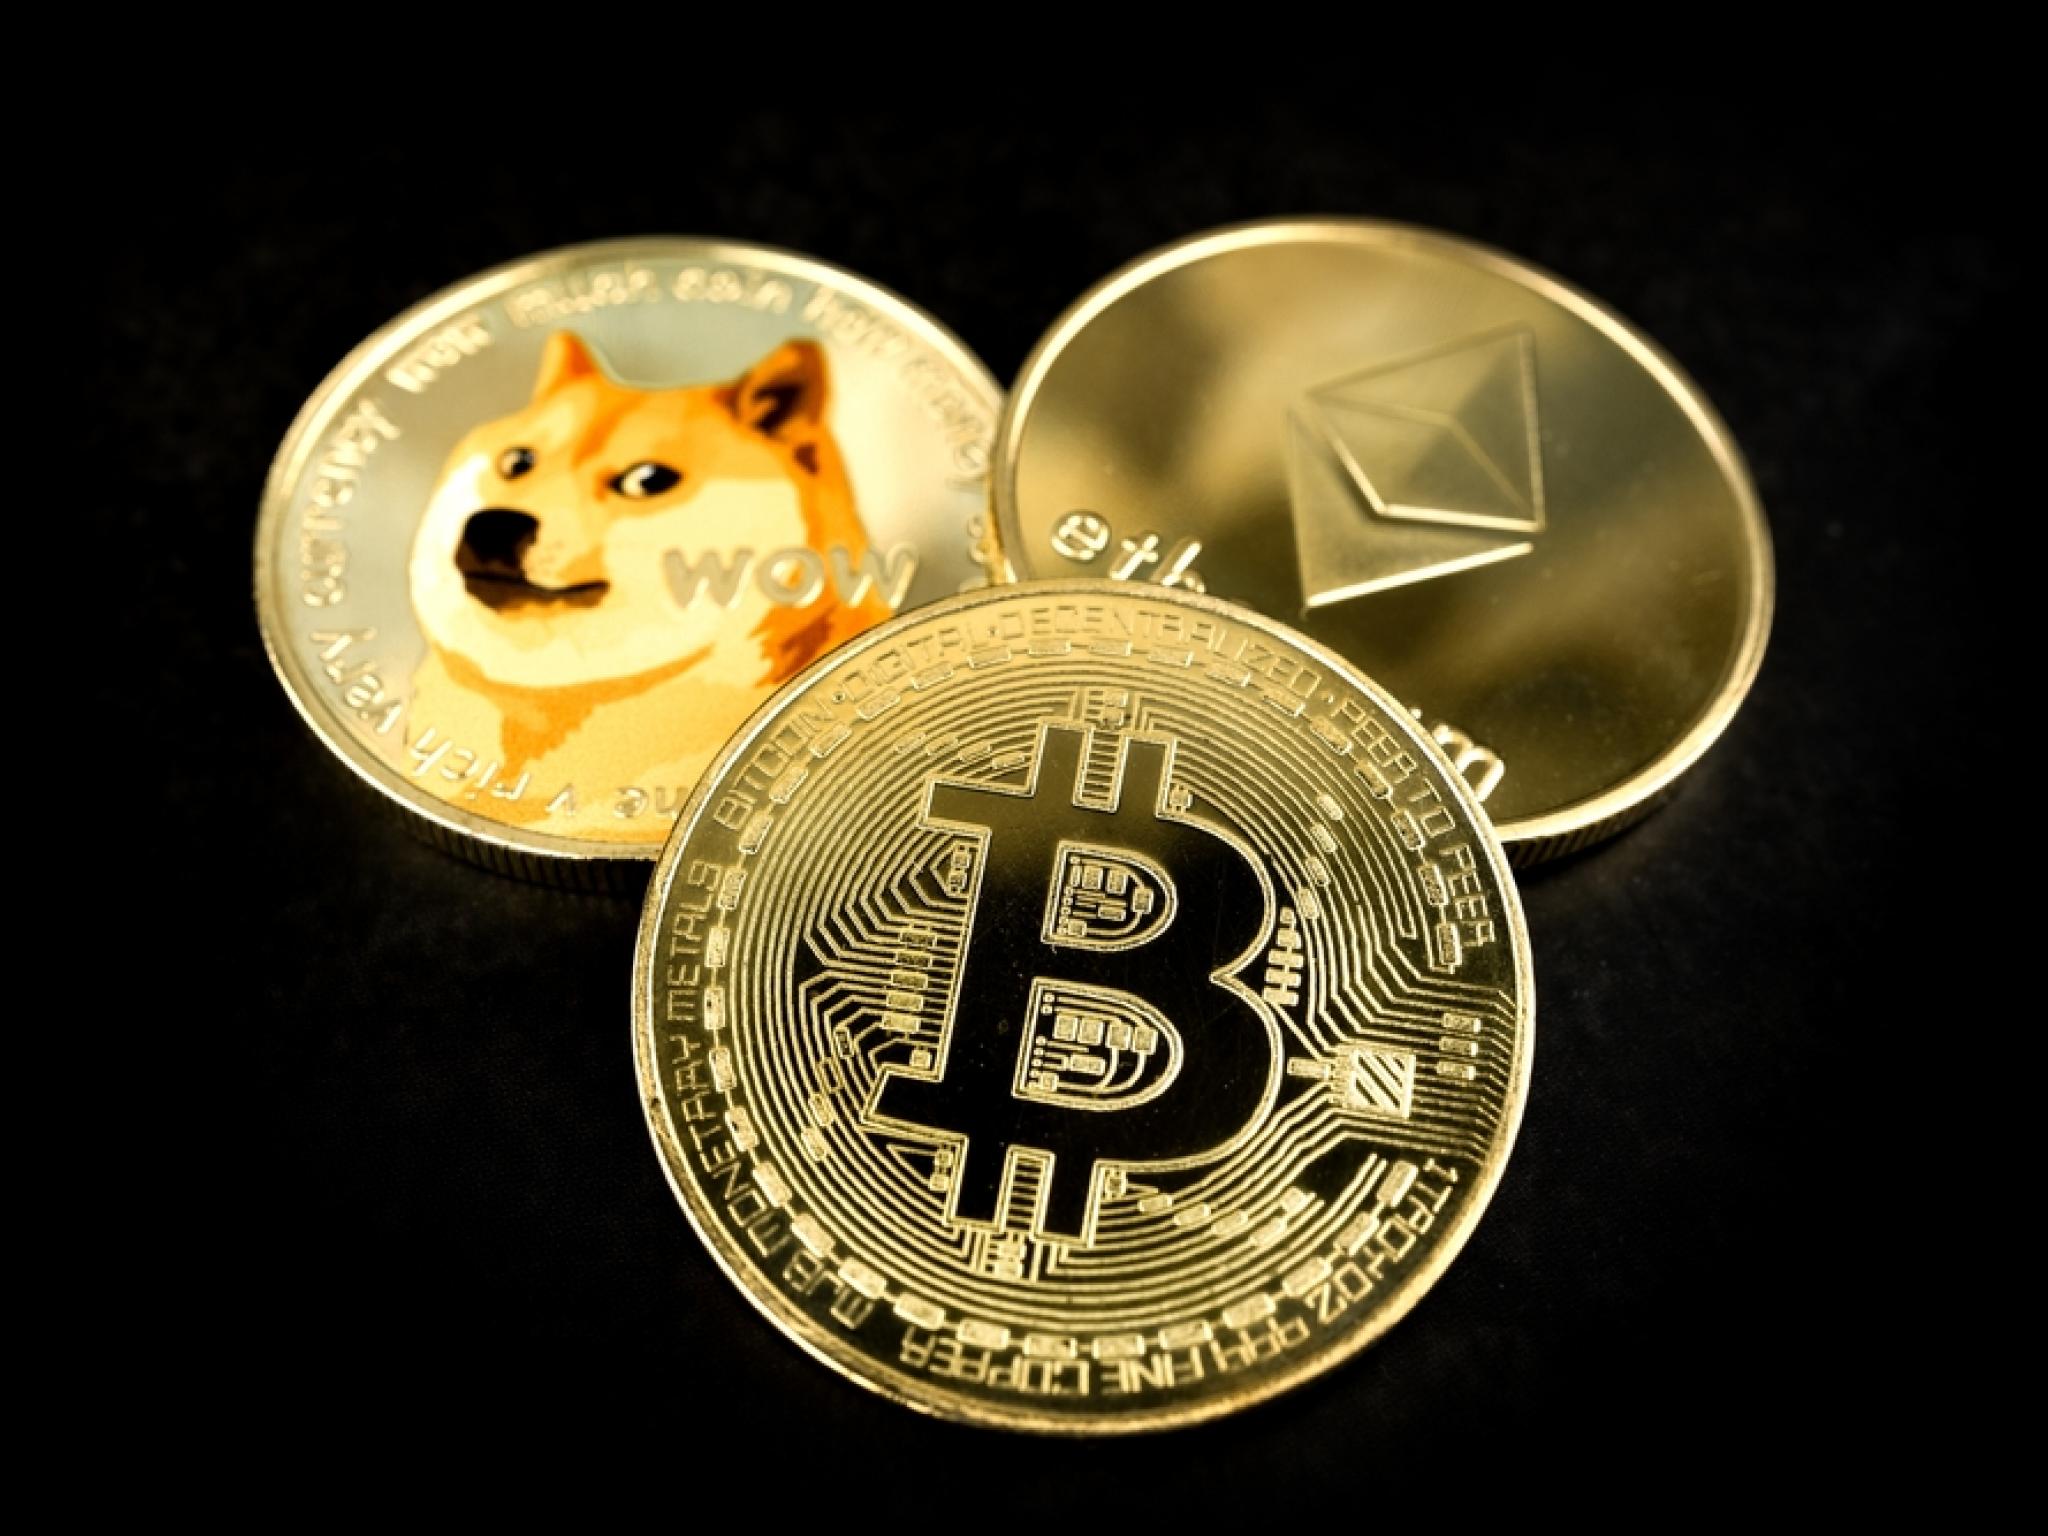  bitcoin-touches-70k-again-ethereum-dogecoin-bounce-upward-as-crypto-market-recovers-analyst-says-if-rally-resumes-king-crypto-could-retest-all-time-highs 